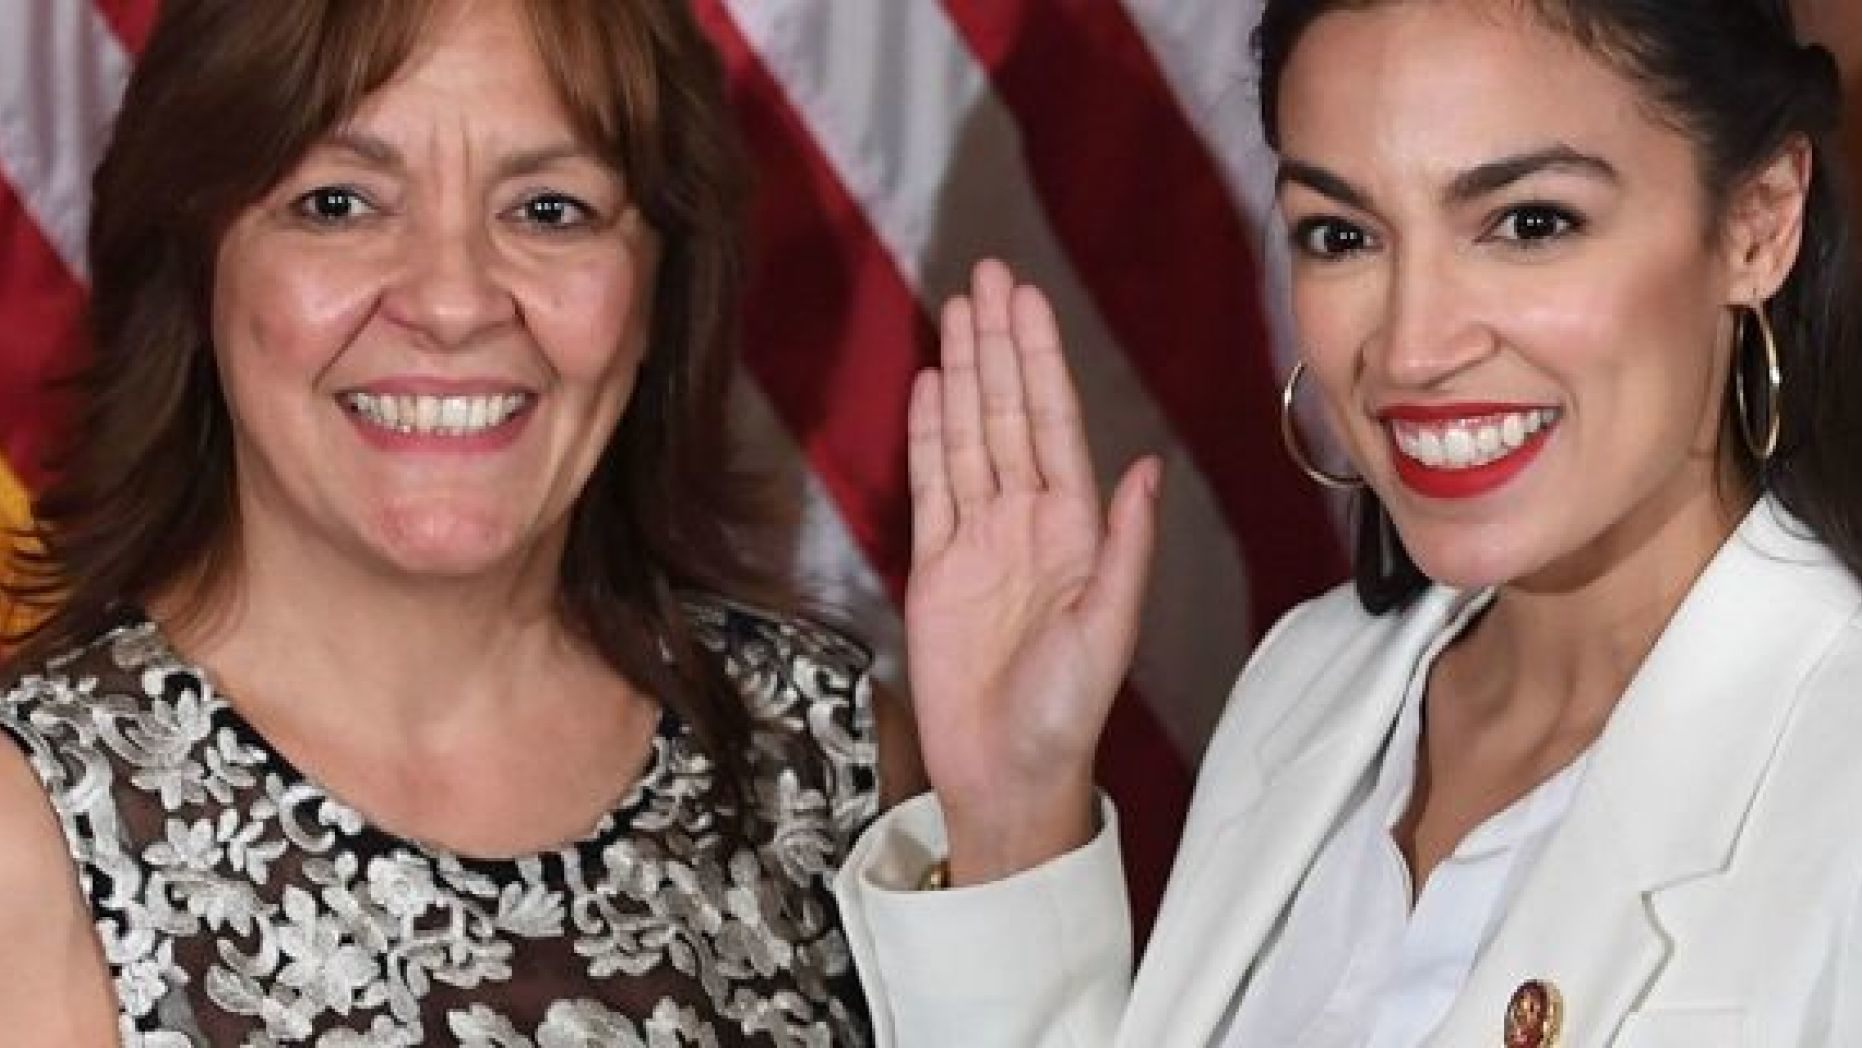 Mom Alexandria Ocasio-Cortez exchanged new York to Florida because of too high taxes